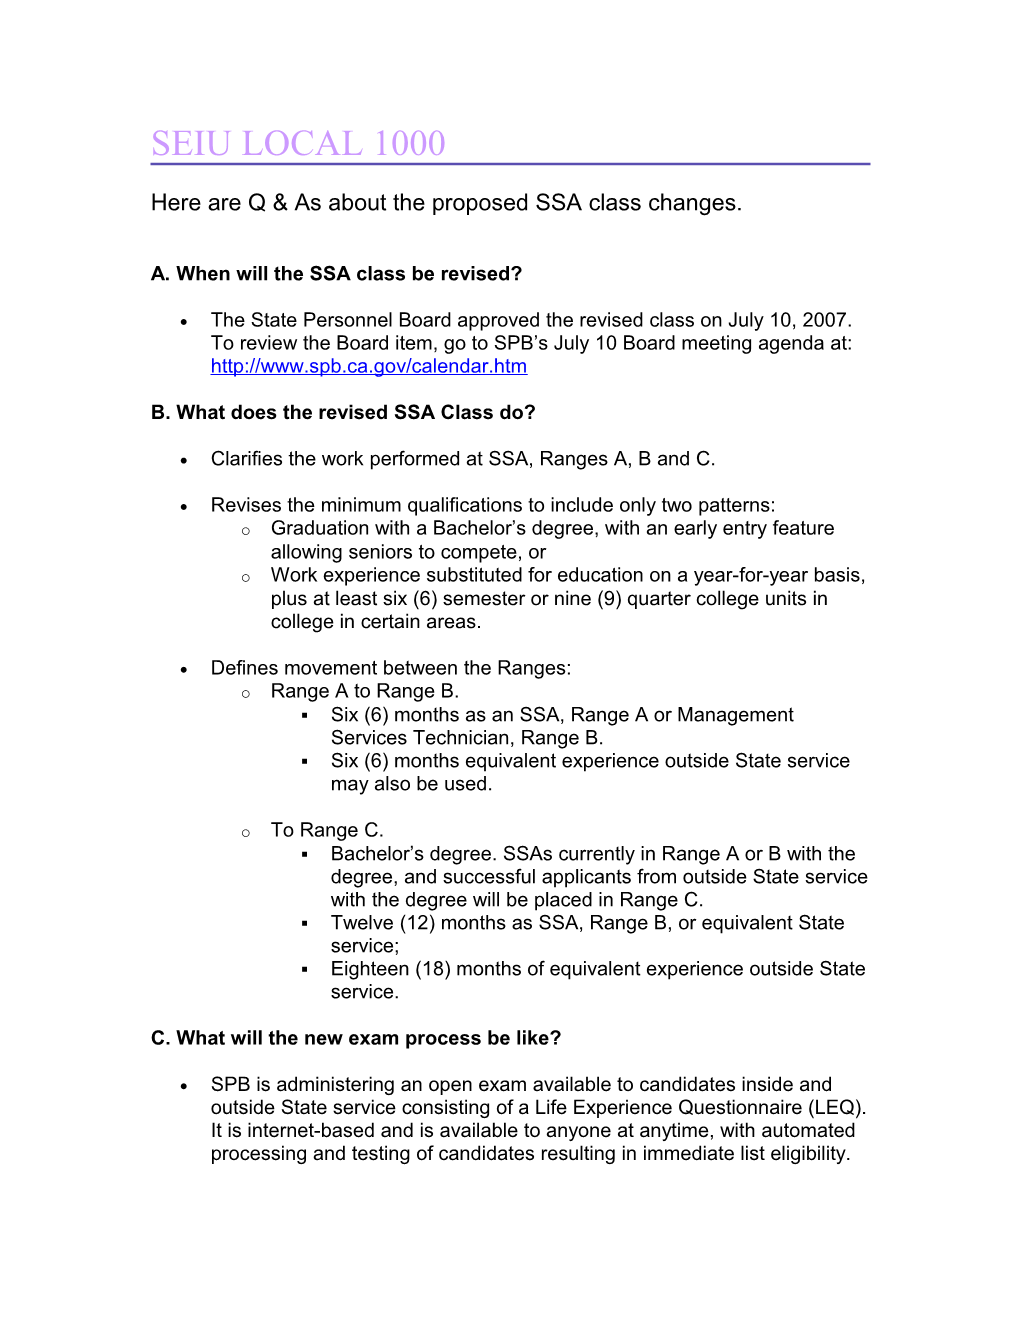 Here Are Q & As About the Proposed SSA Class Changes